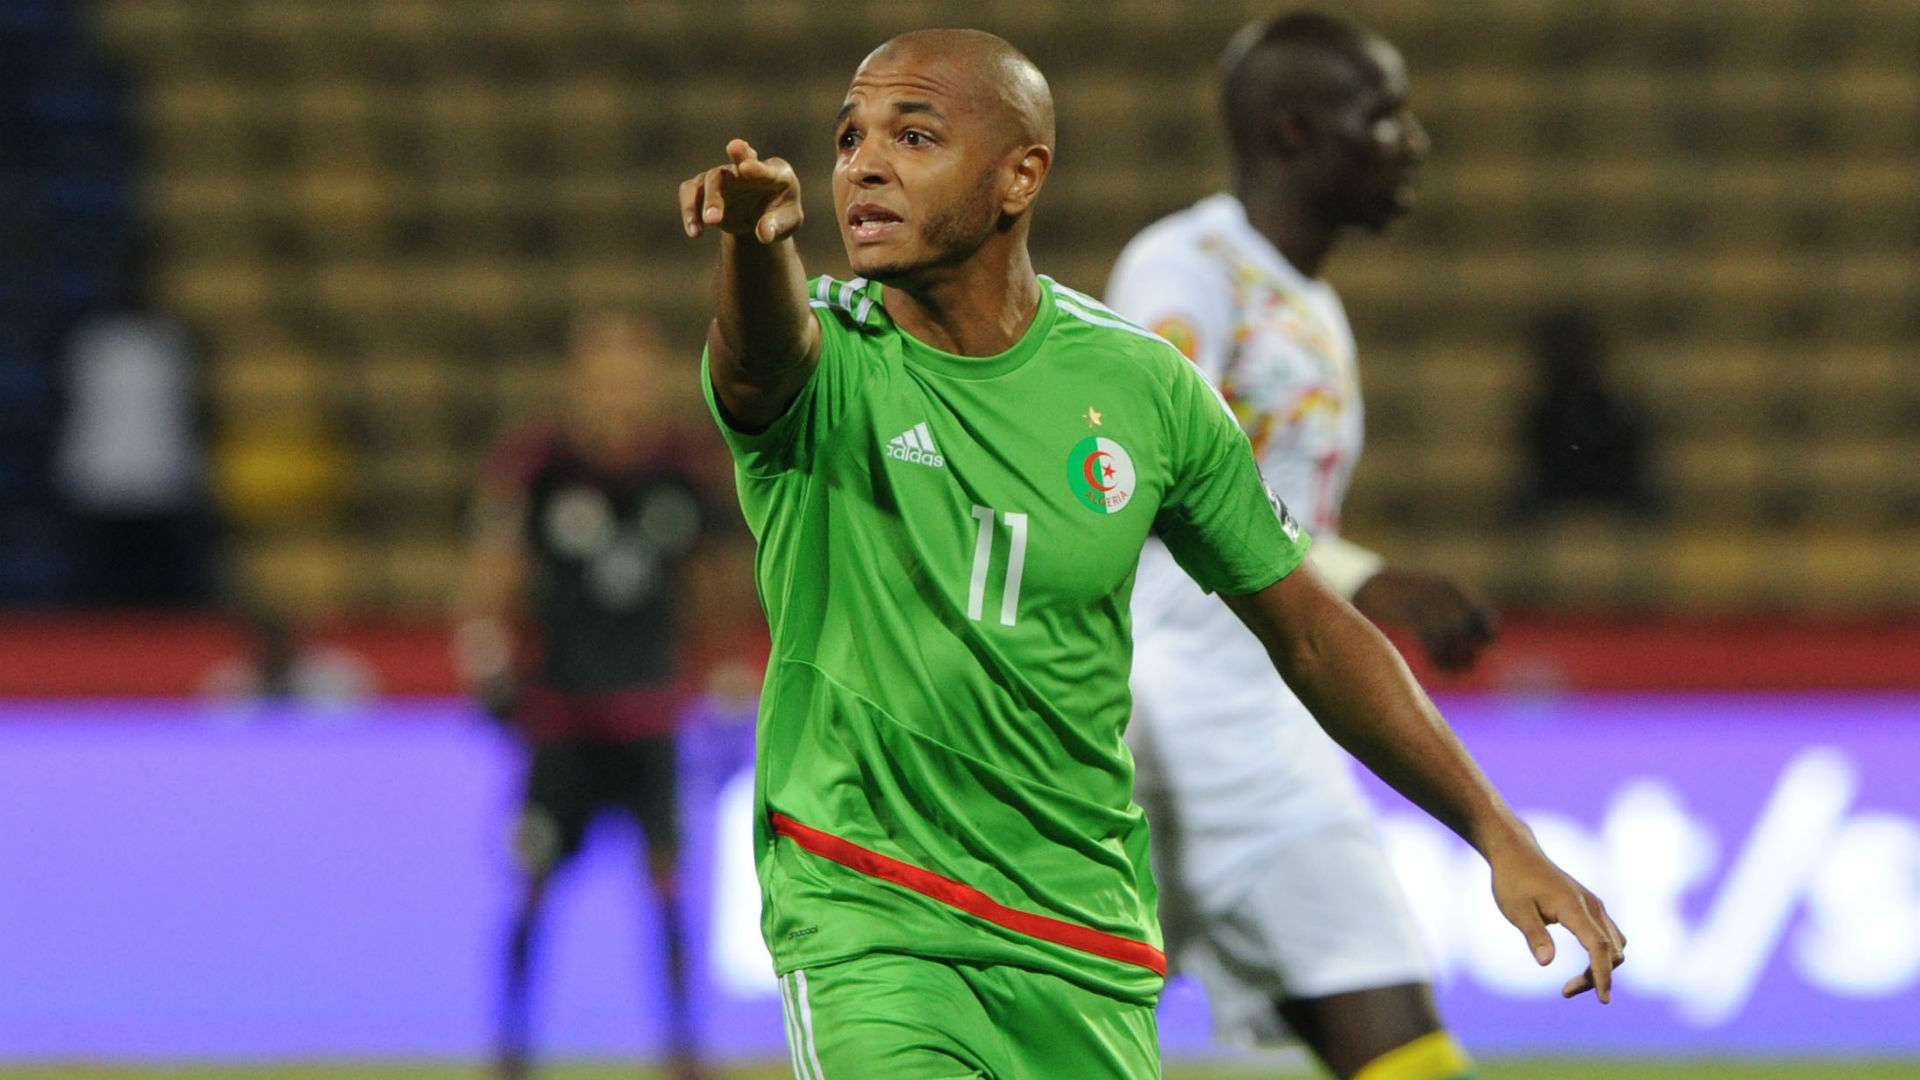 Yacine Nasr Brahimi of Algeria during the Afcon Group B match between Senegal.